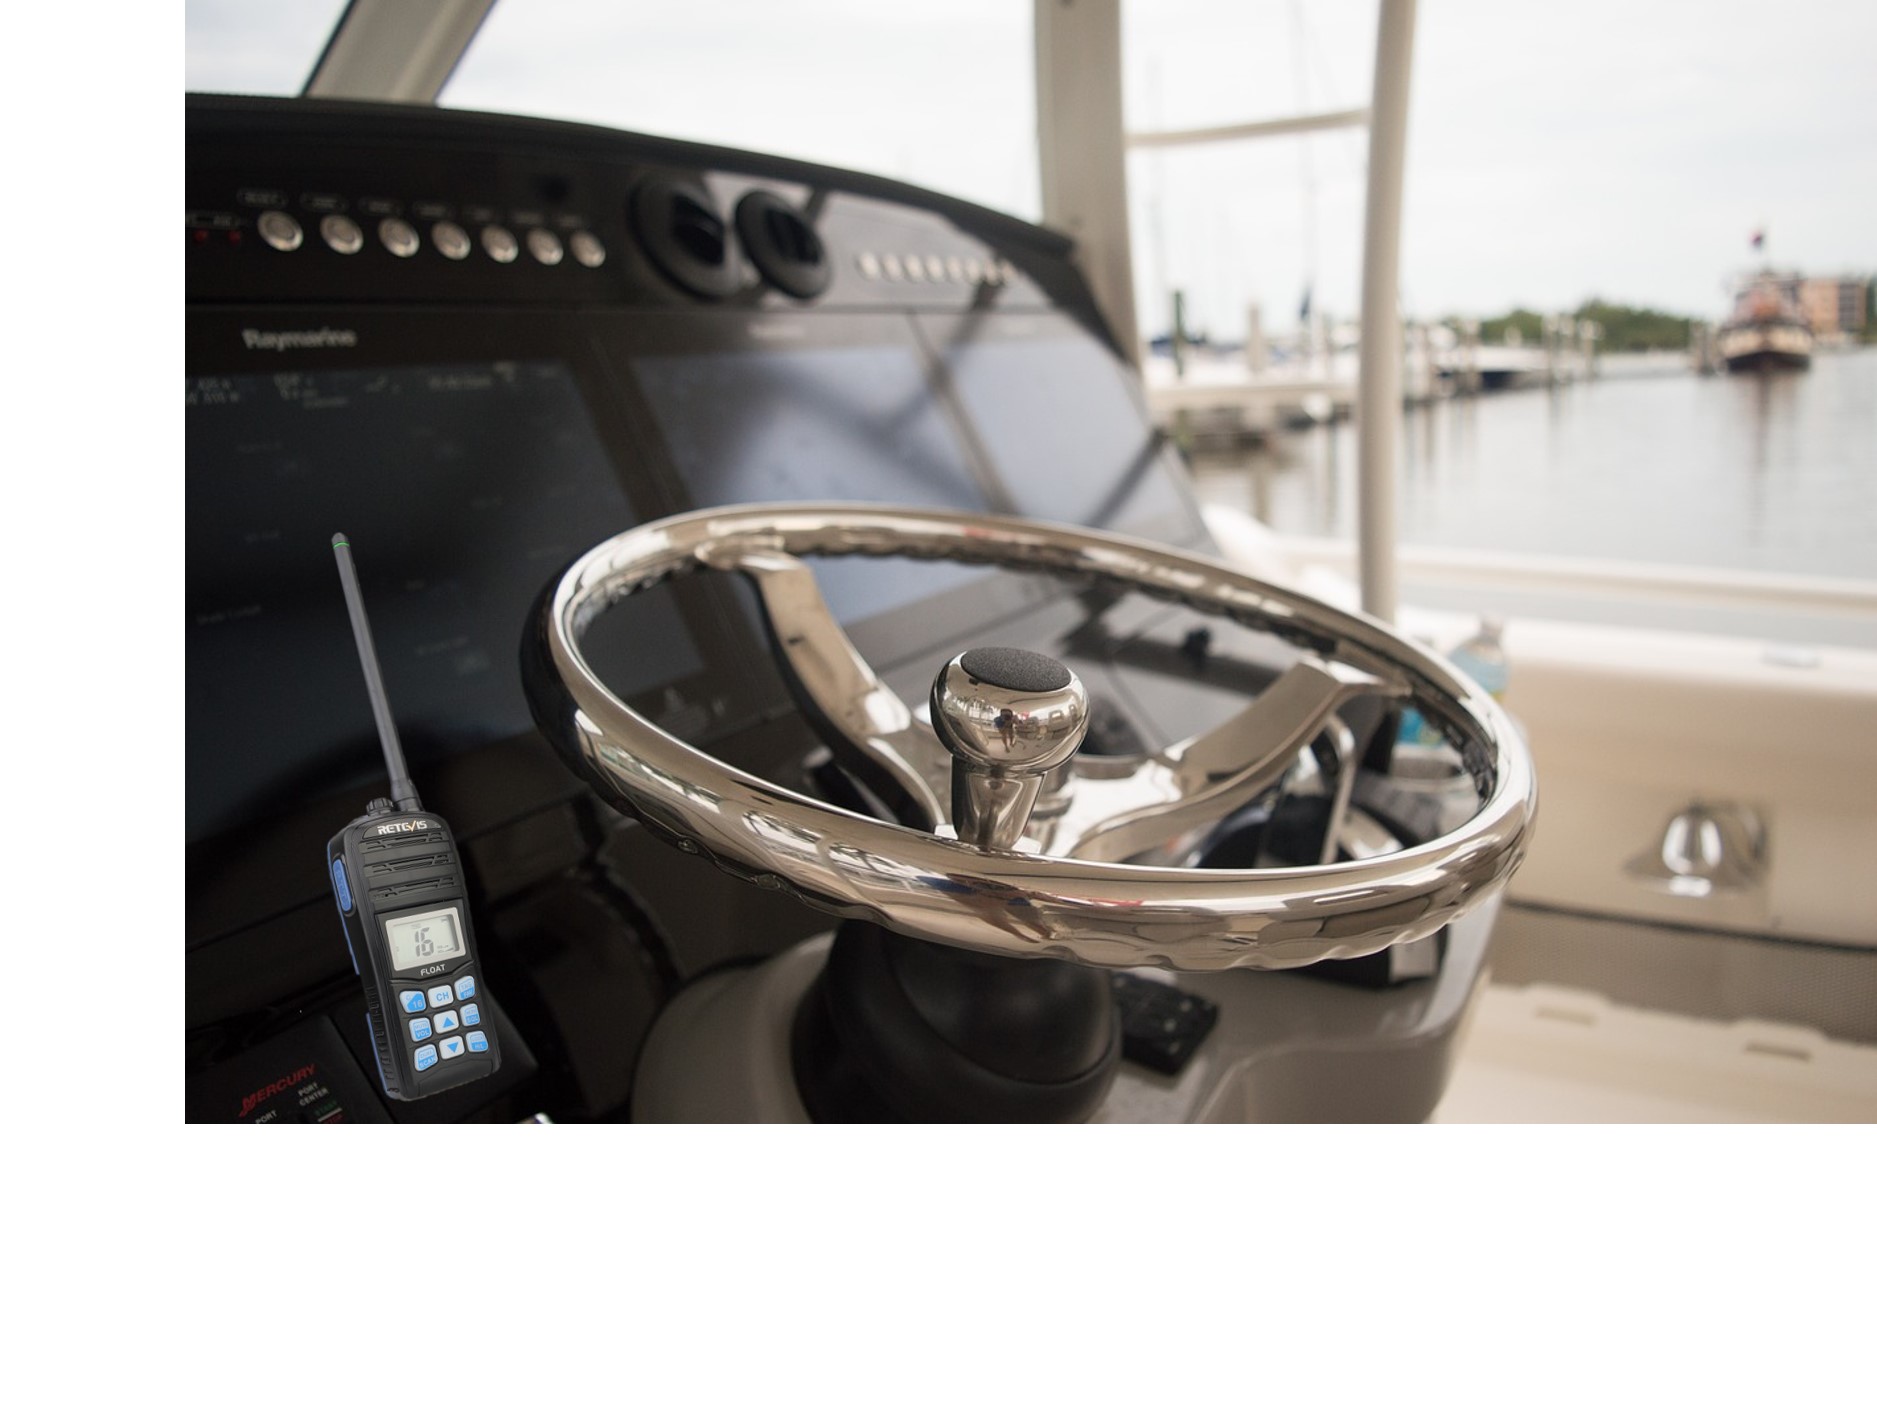 What to consider when you choose a Marine VHF radio?